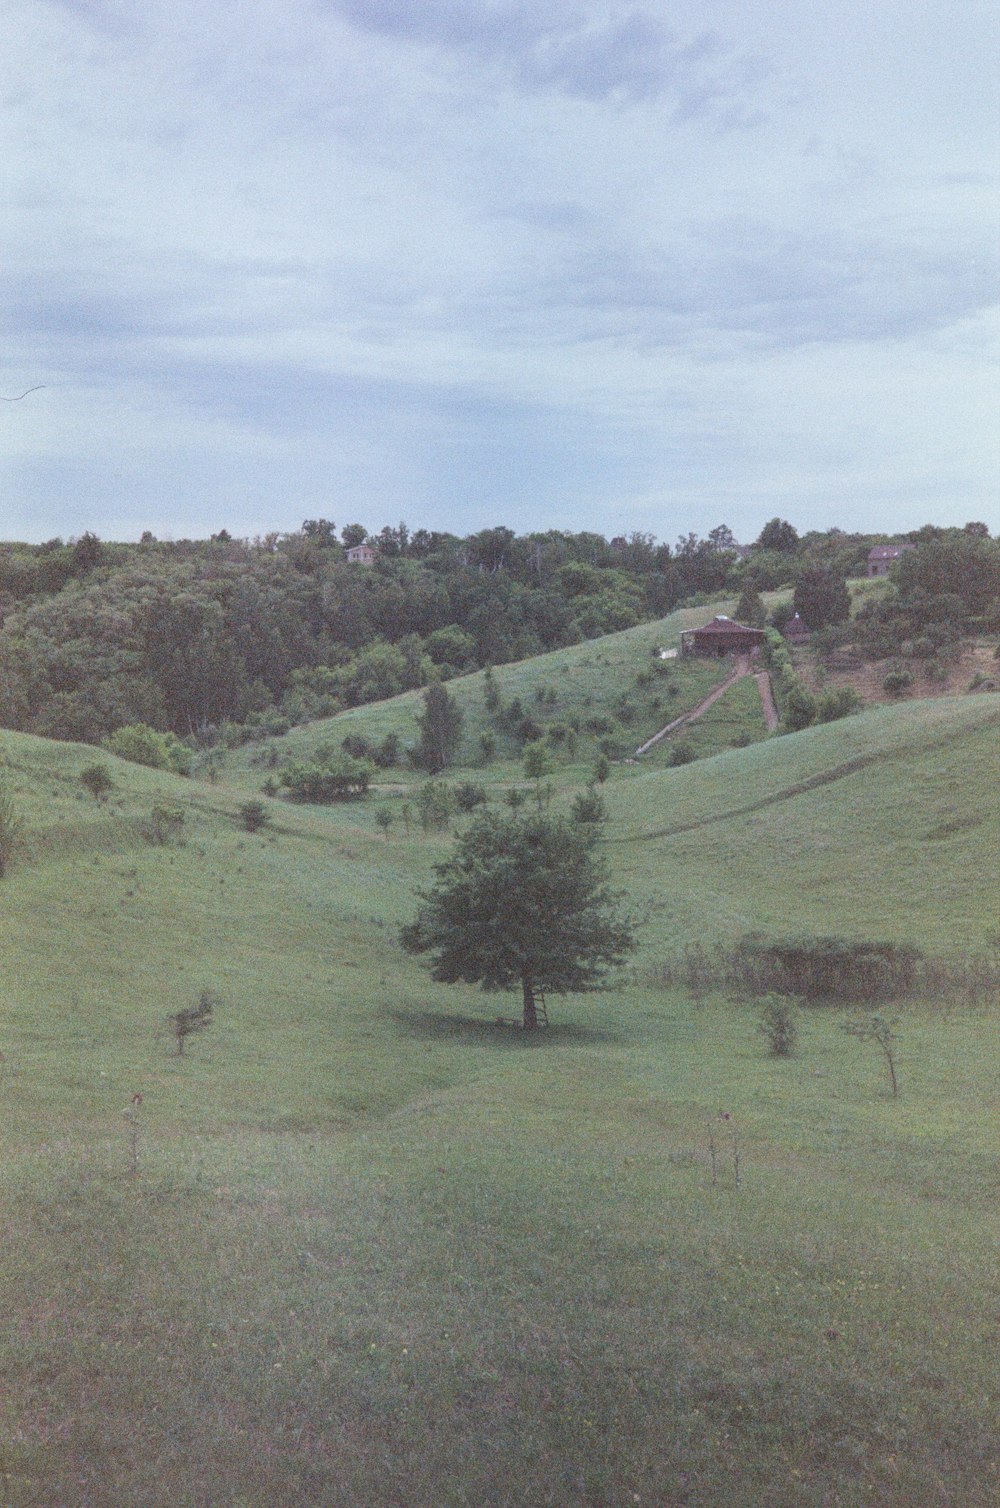 a grassy hill with a lone tree in the foreground